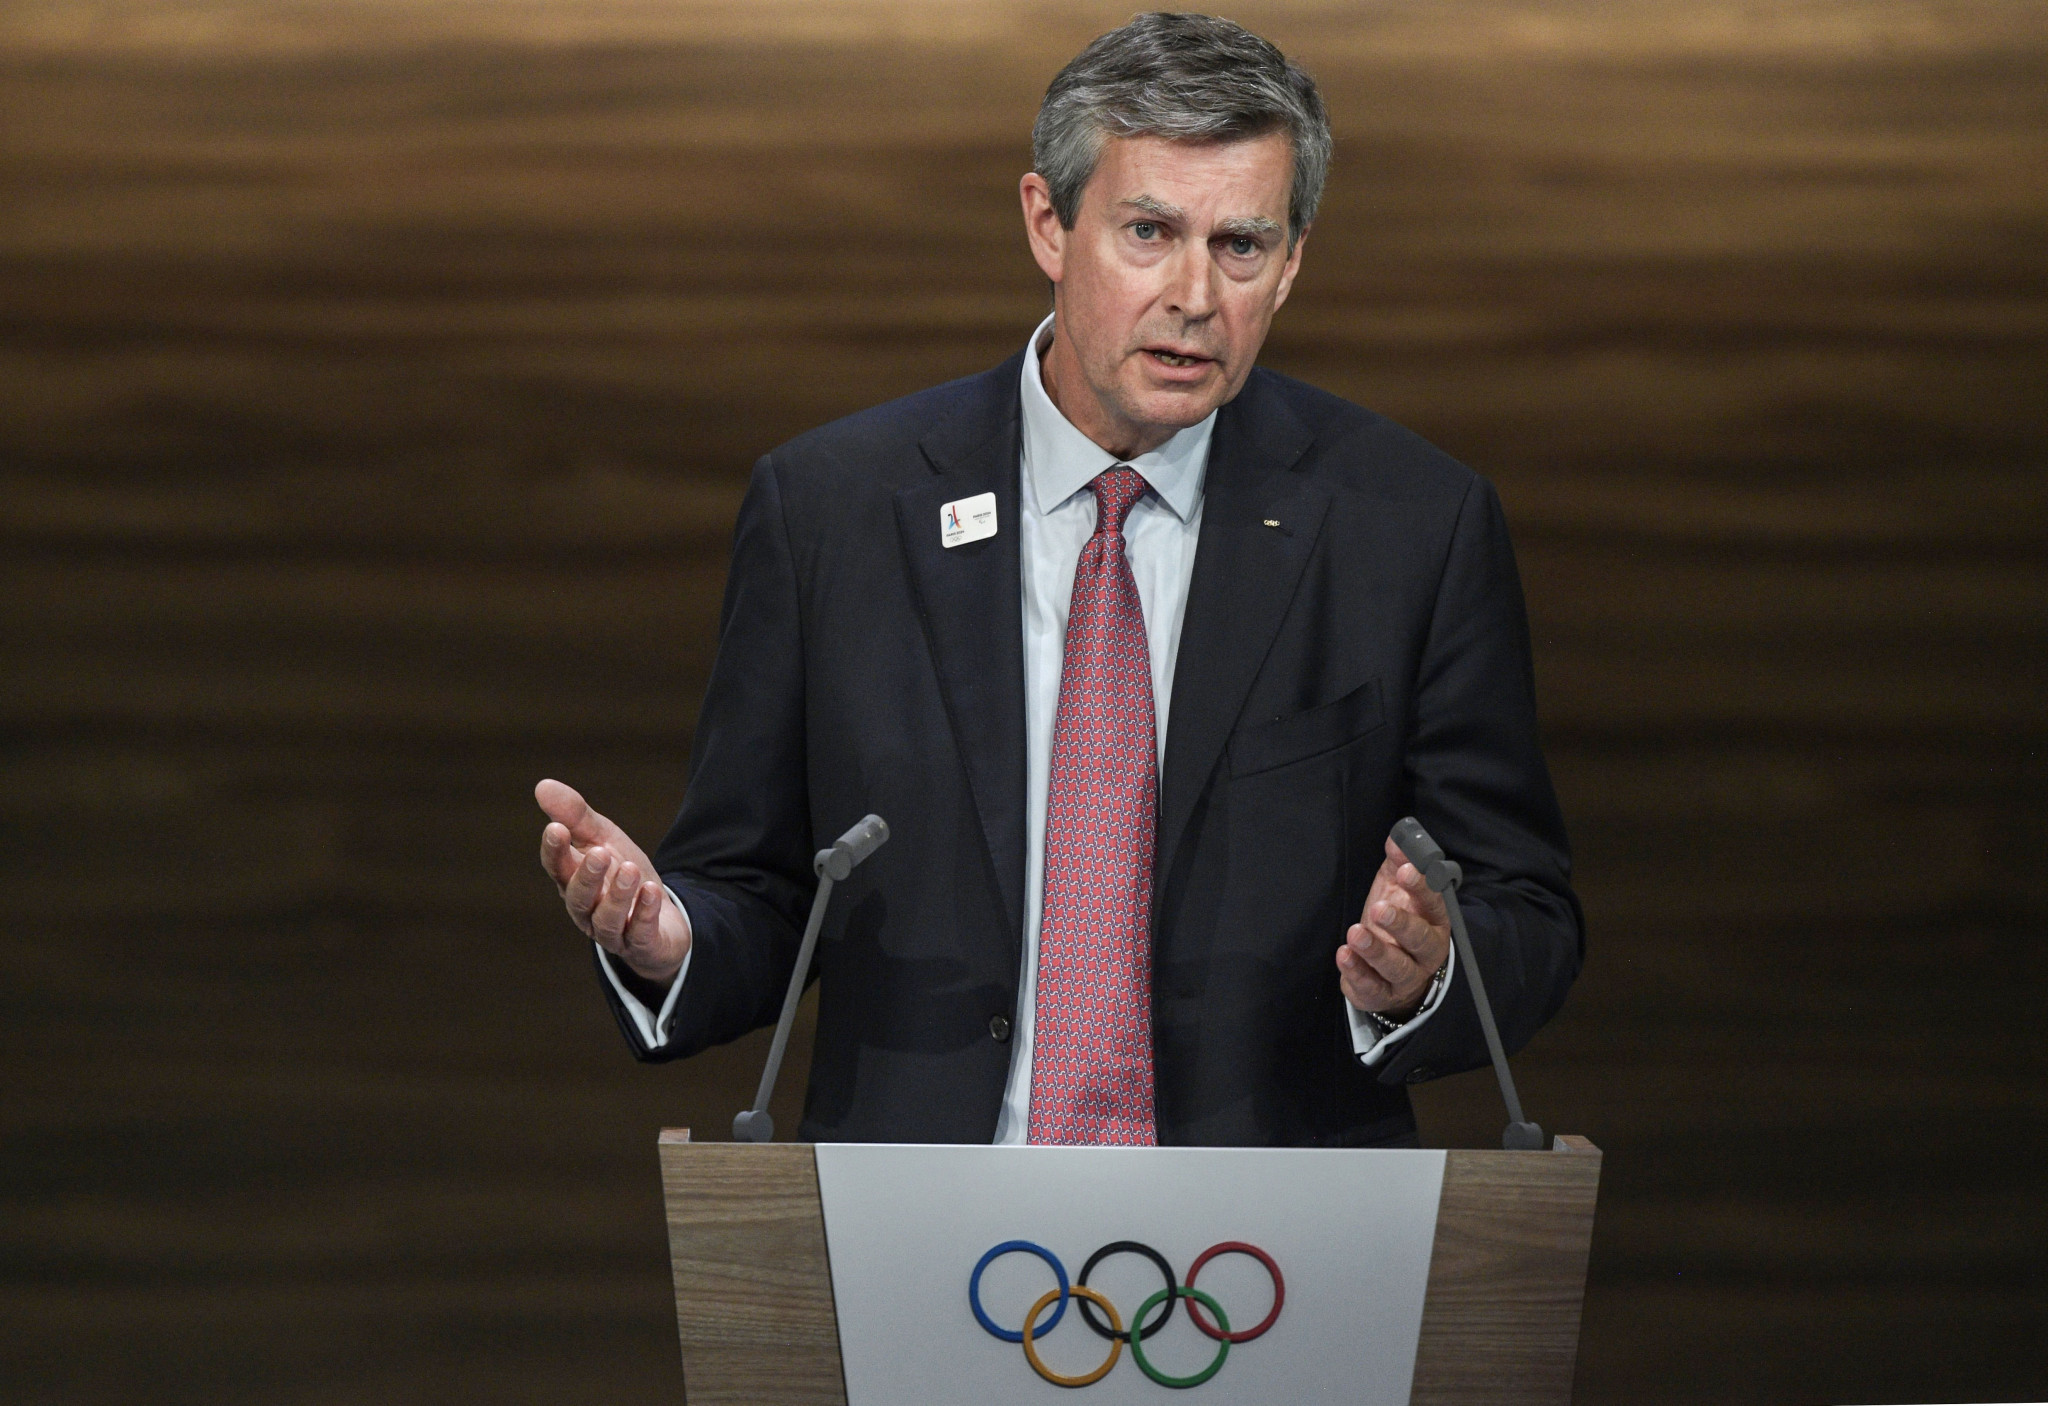 IOC Coordination Commission chairman Pierre-Olivier Beckers-Vieujant said there was still 